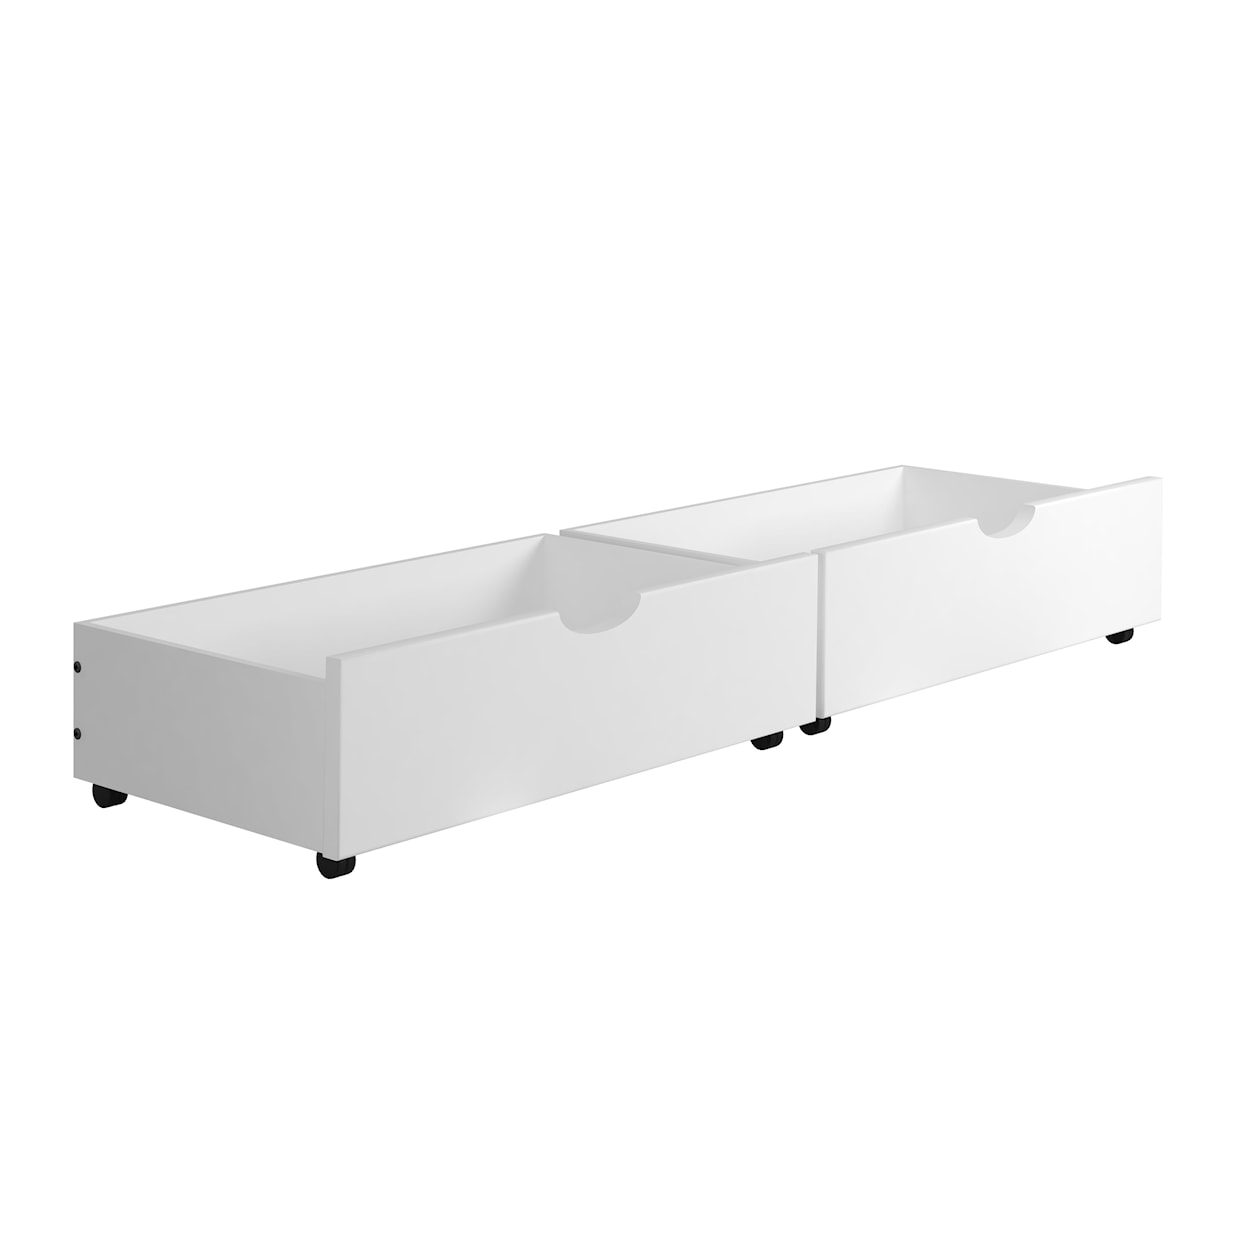 Donco Trading Co Donco Trading Co Dual Underbed Drawers